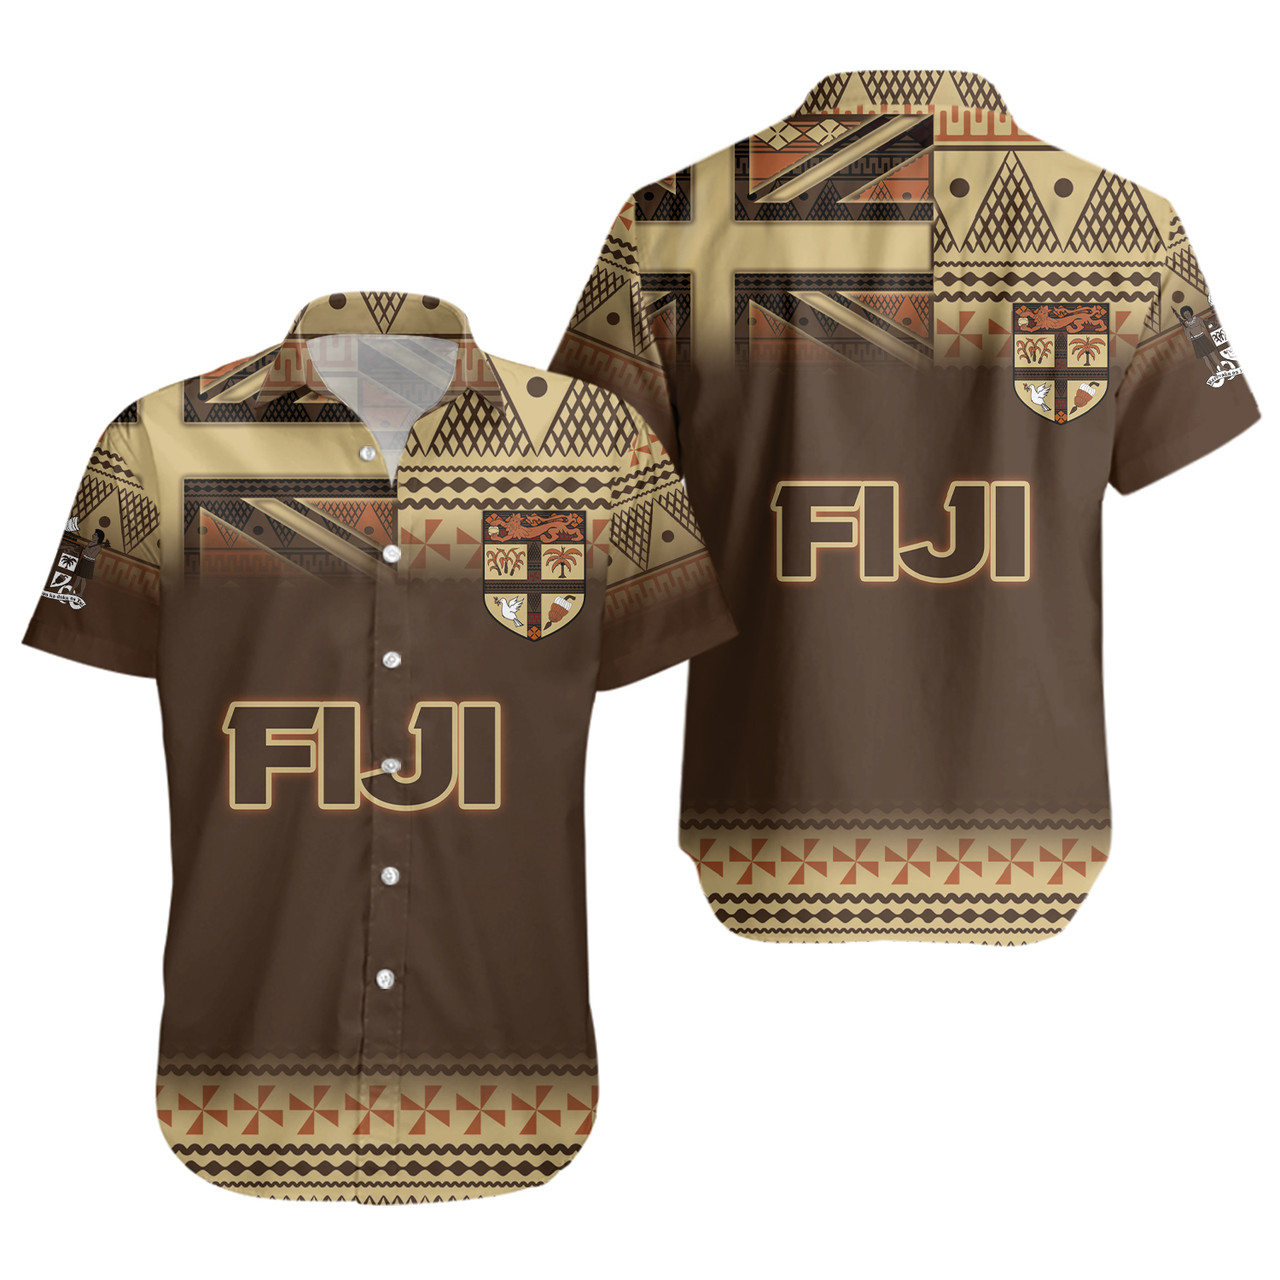 Fiji Short Sleeve Shirt Flag Color With Traditional Patterns Ver 2